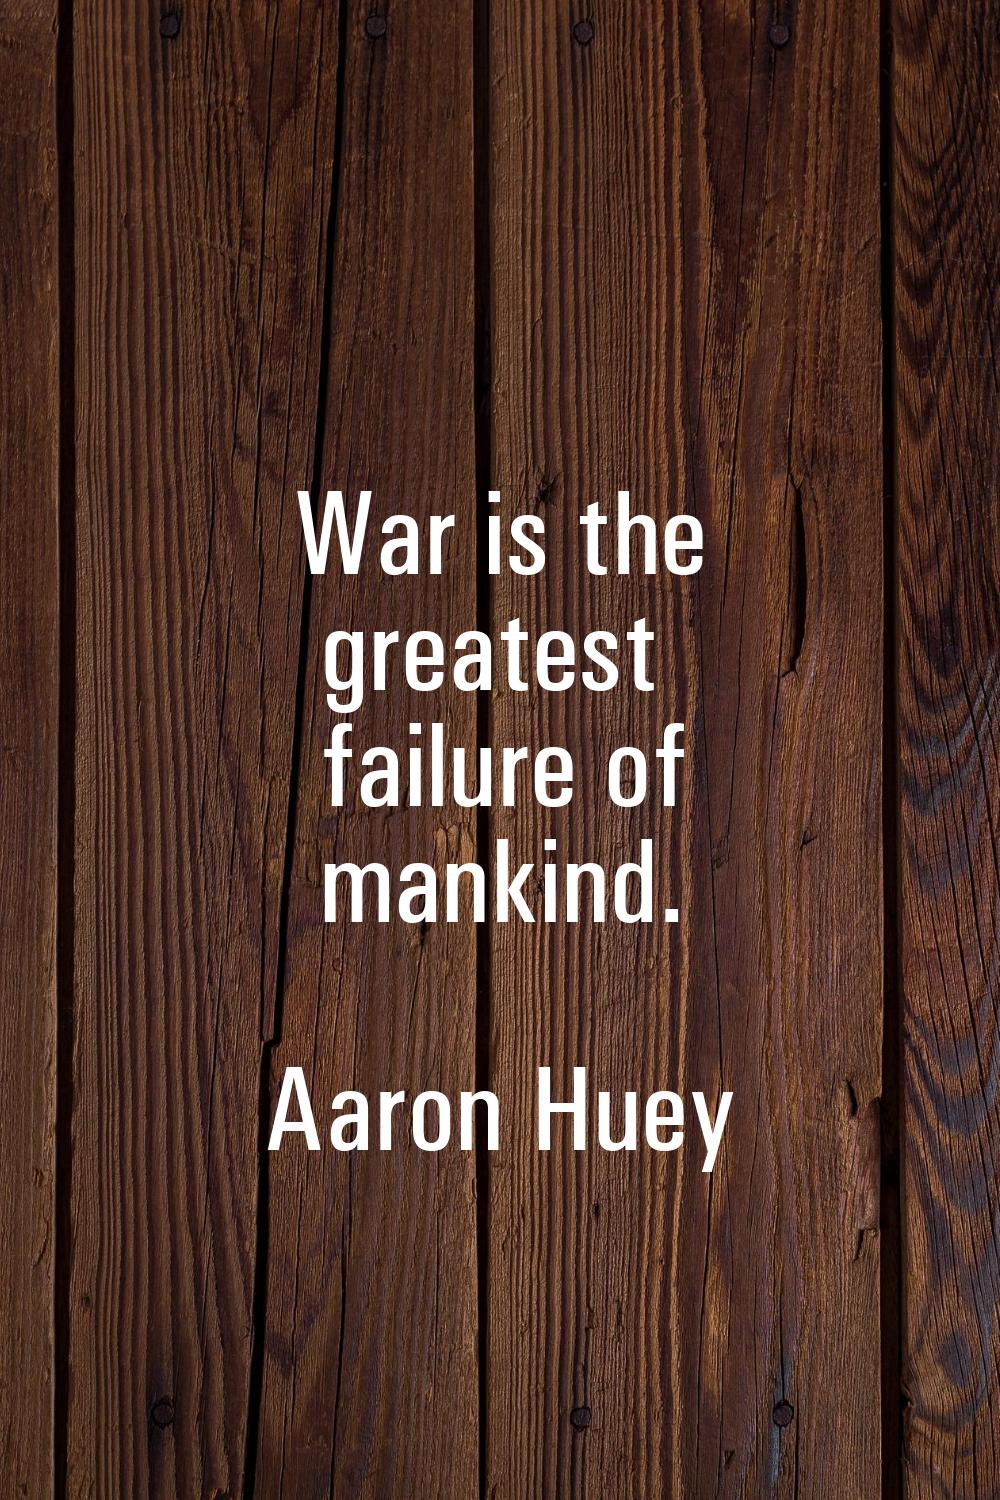 War is the greatest failure of mankind.